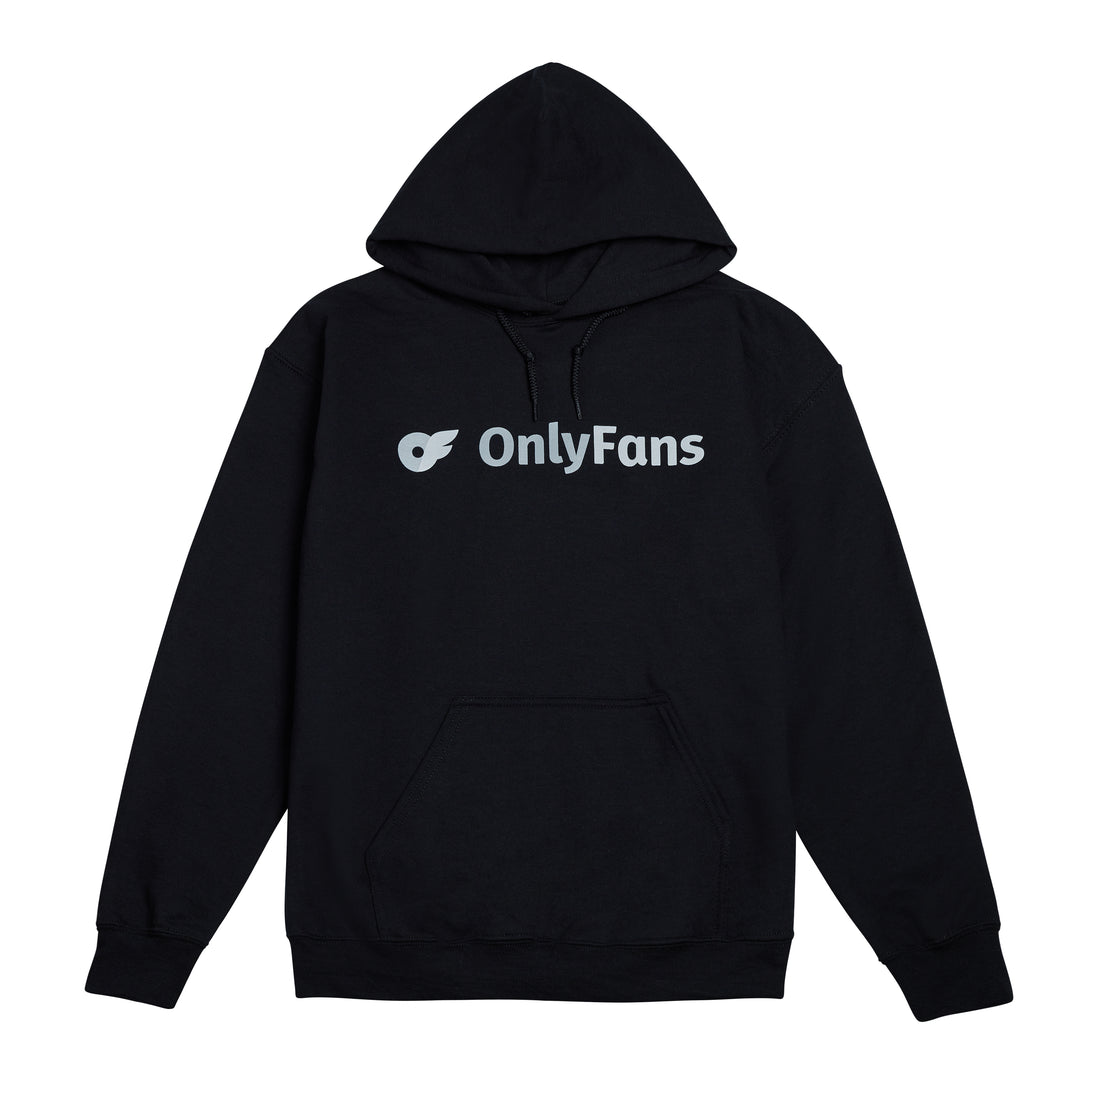 The Best Clothing Items To Wear For Your OnlyFans - Follower